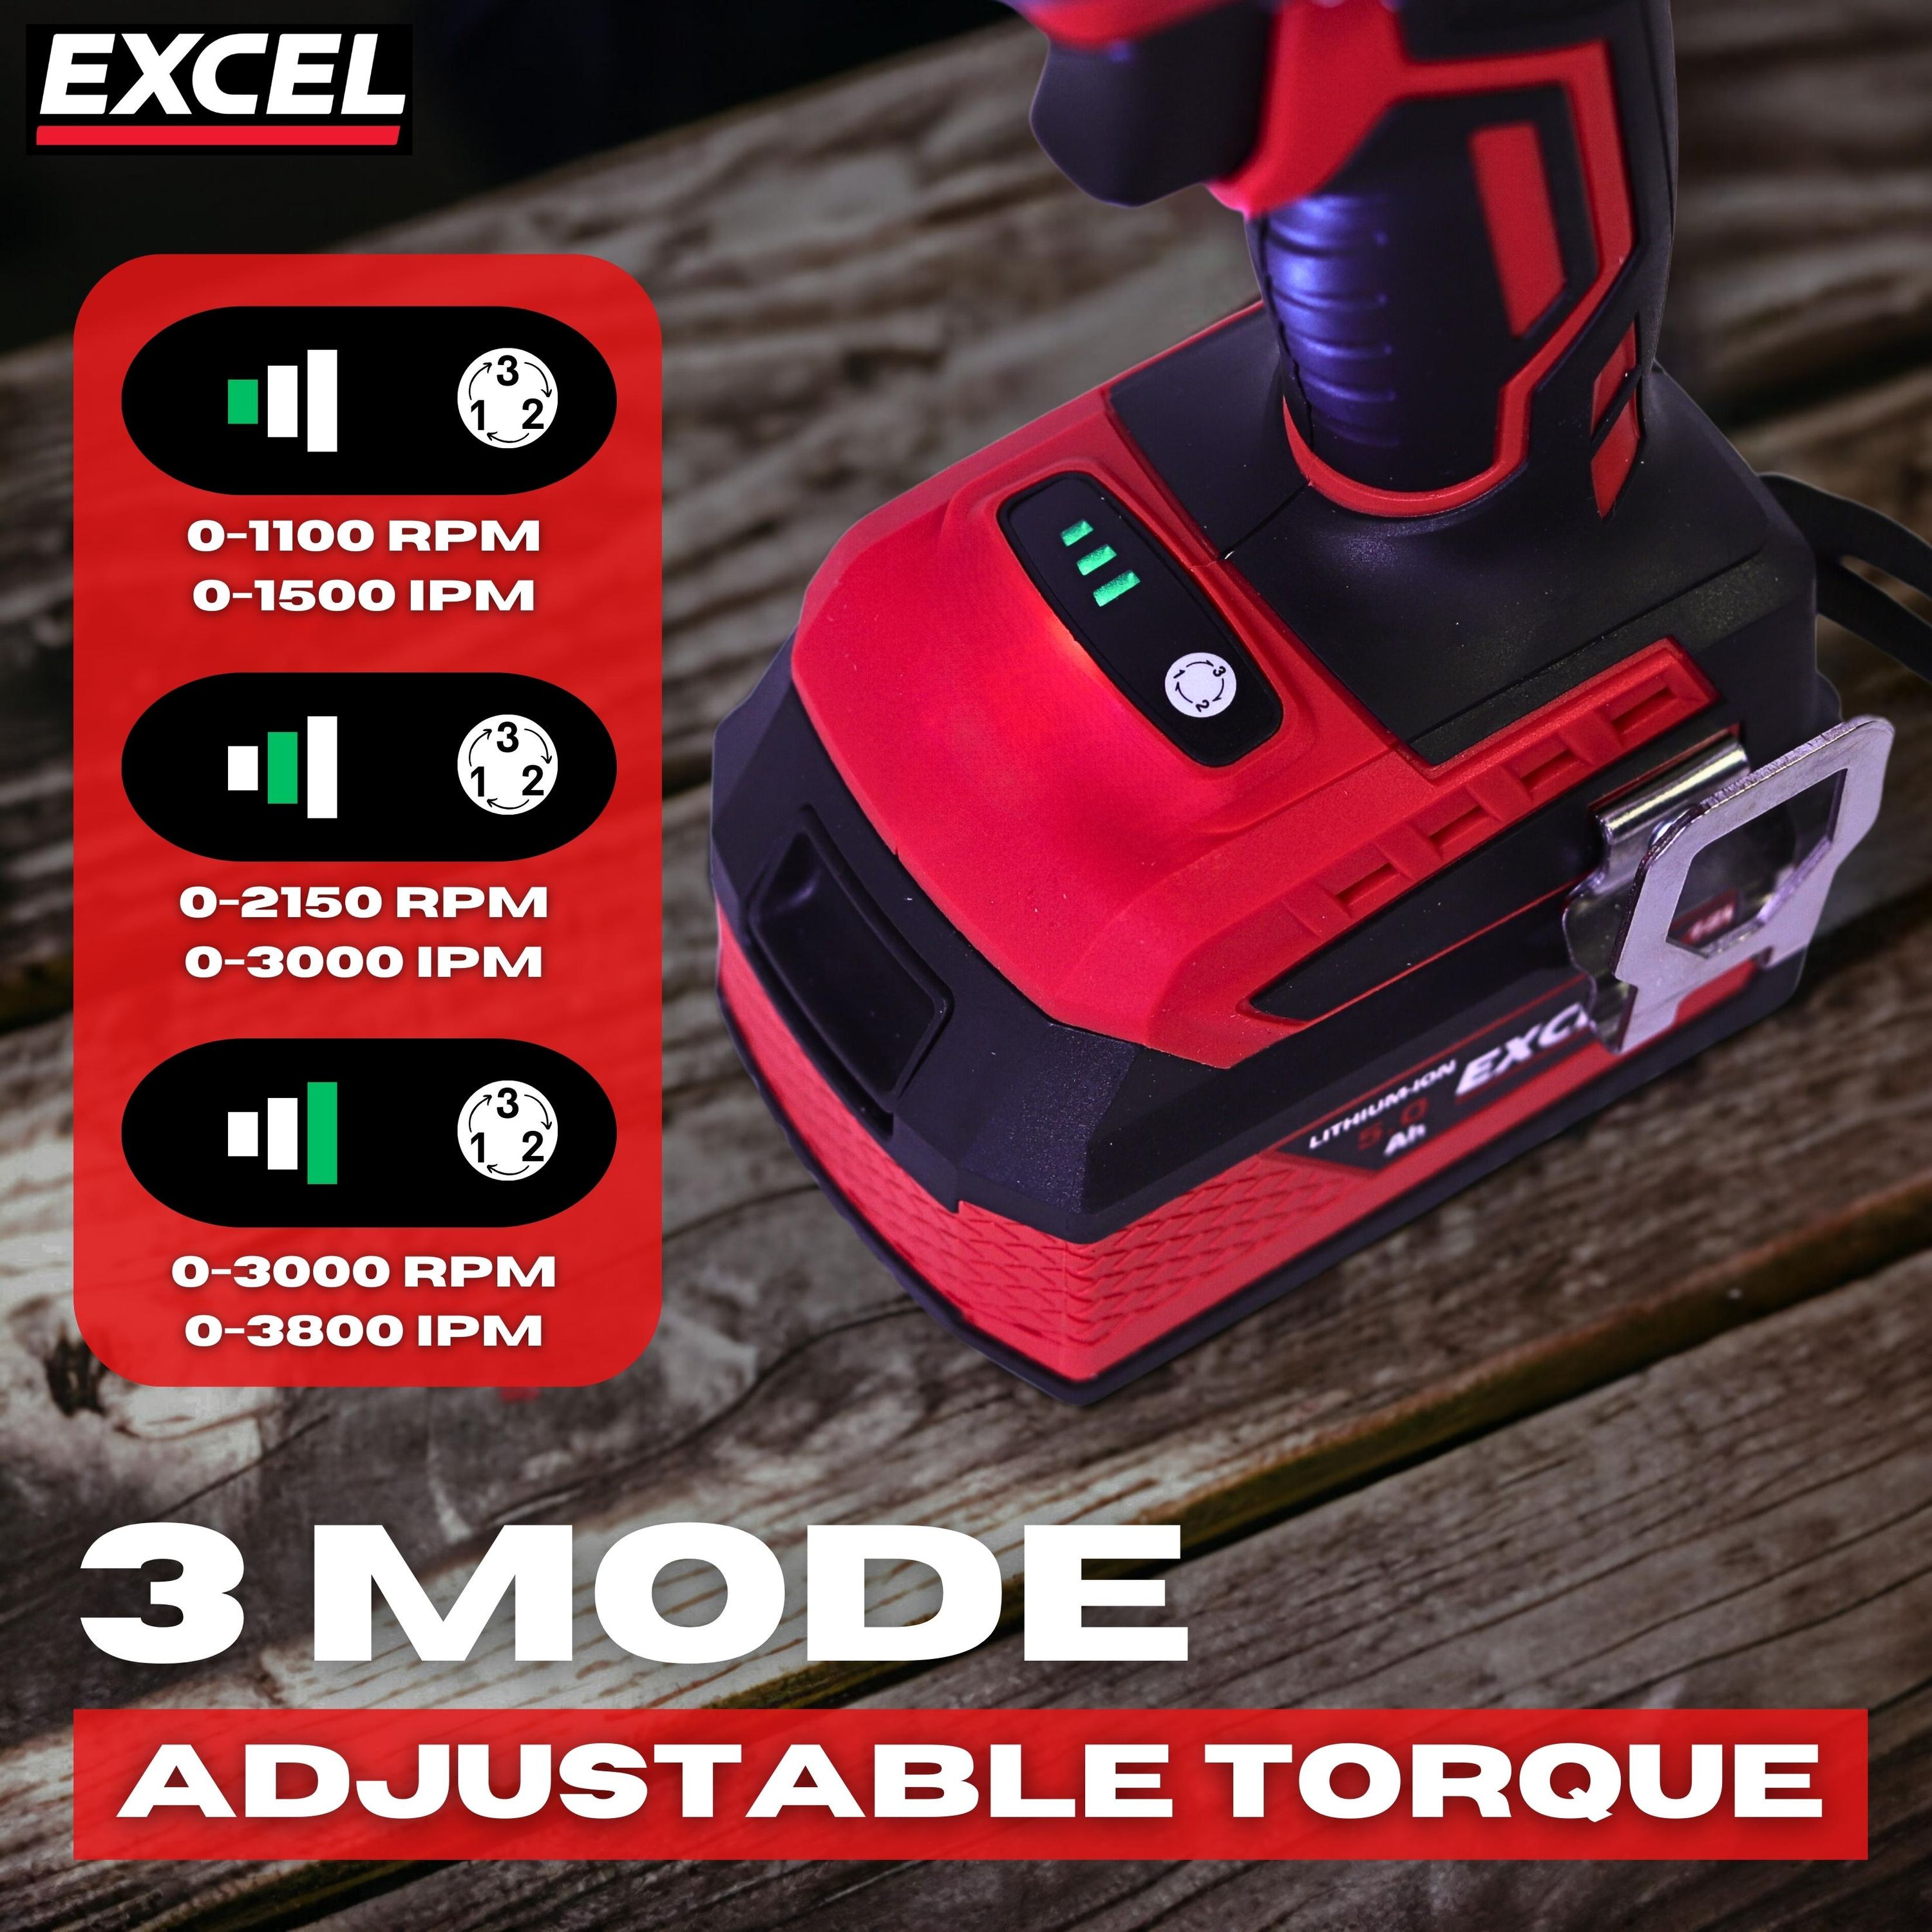 Excel 18V Cordless Brushless Impact Driver with 2 x 2.0Ah Battery & Charger